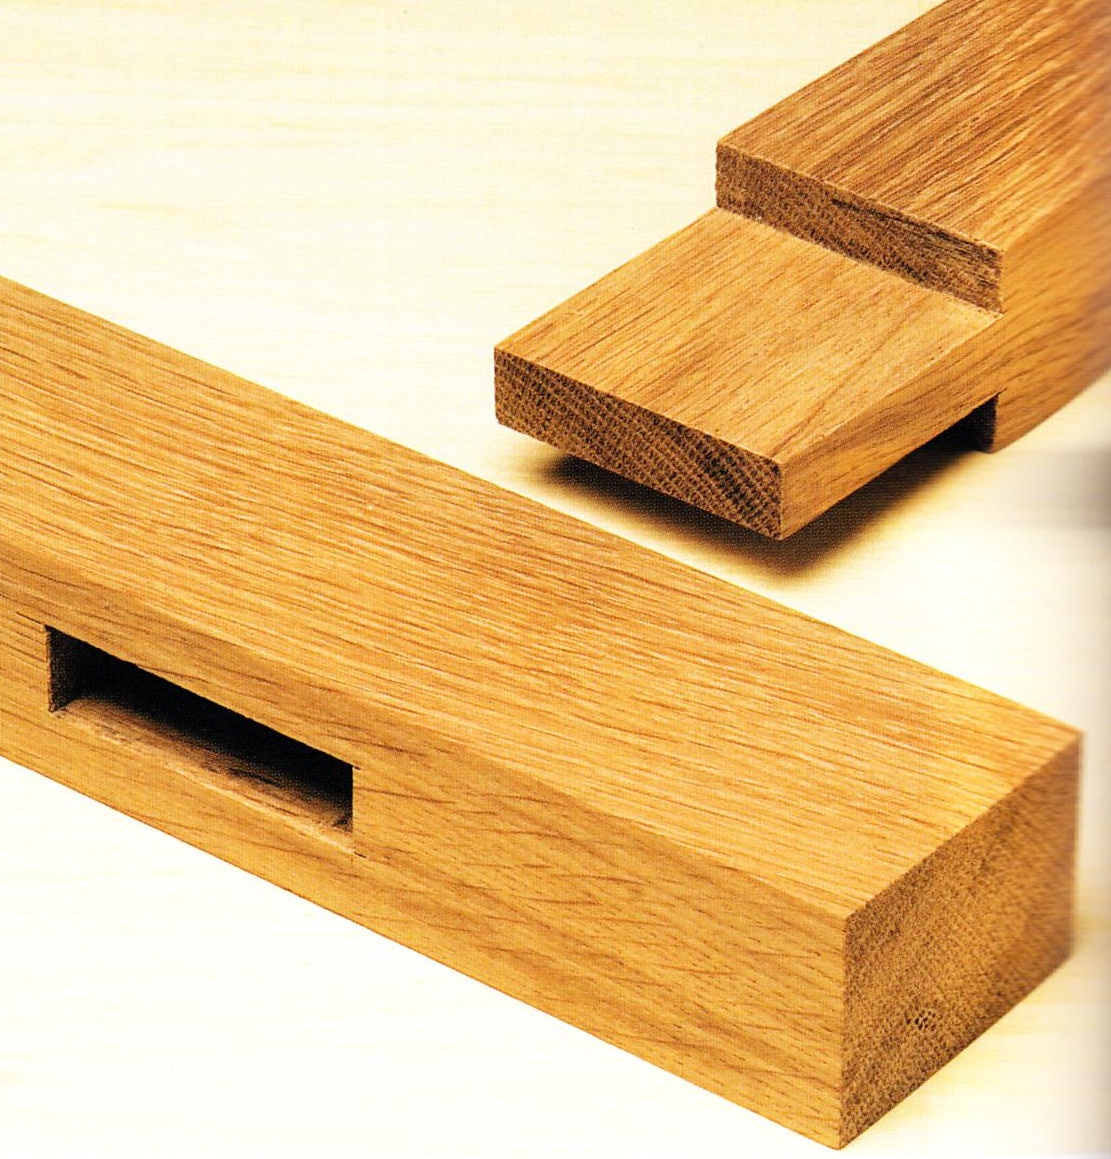 Mortise and Tenon Joint | Identifying Antique Joinery